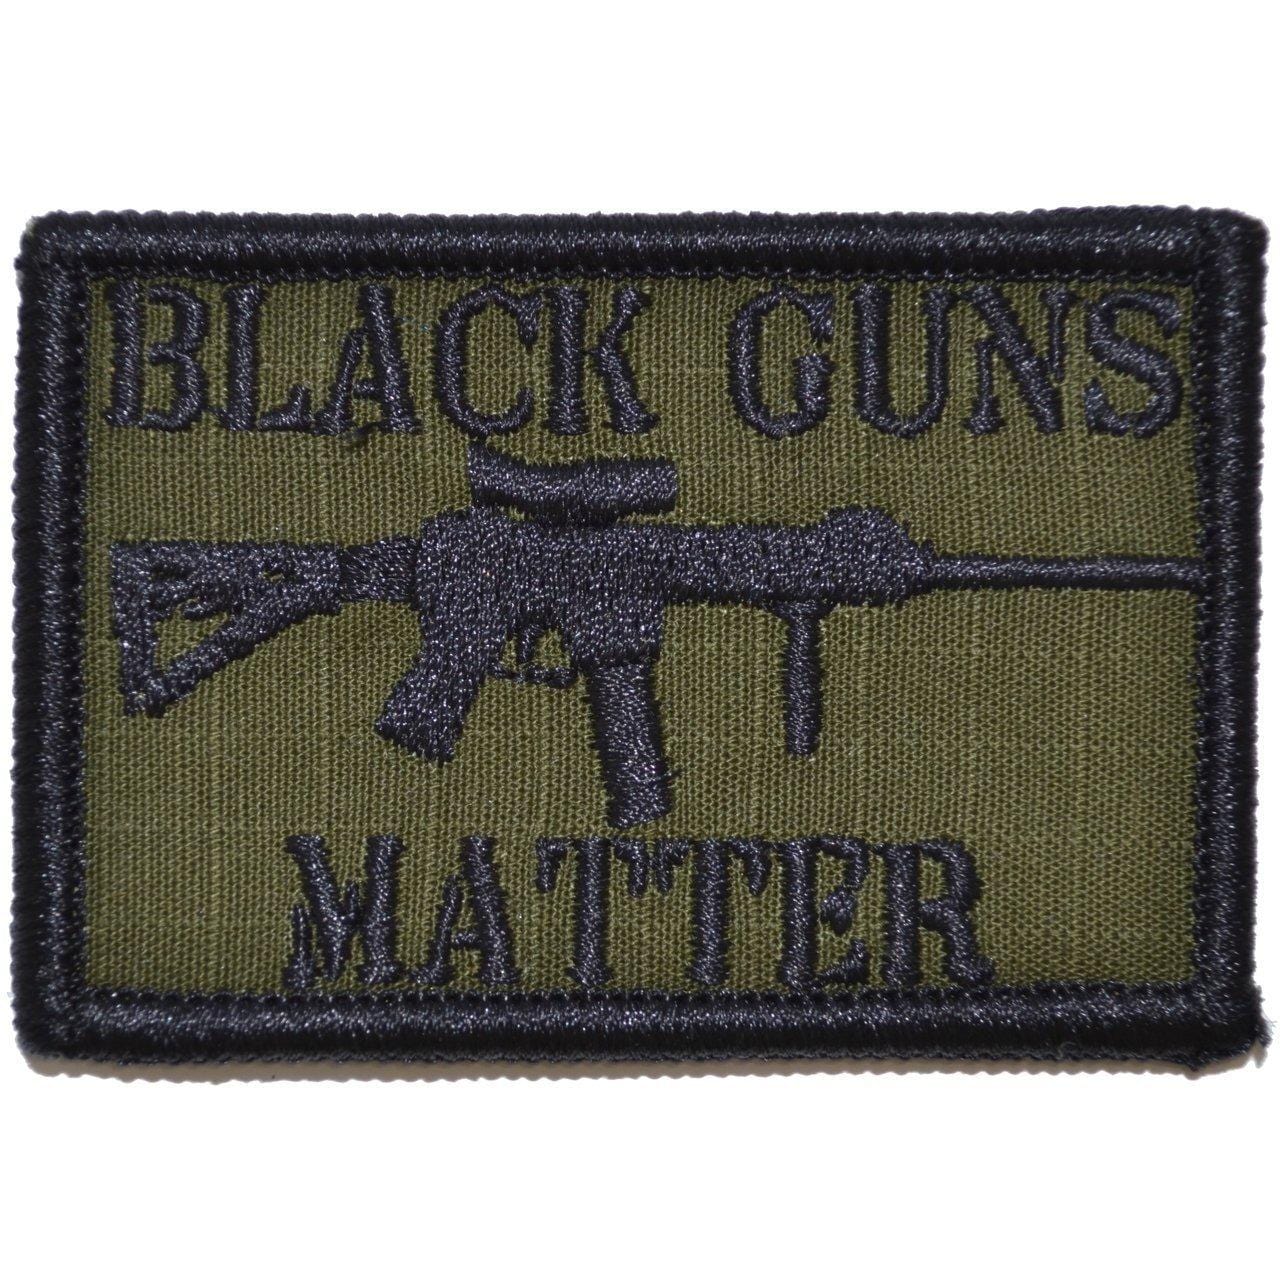 Tactical Gear Junkie Patches Olive Drab Black Guns Matter - 2x3 Patch